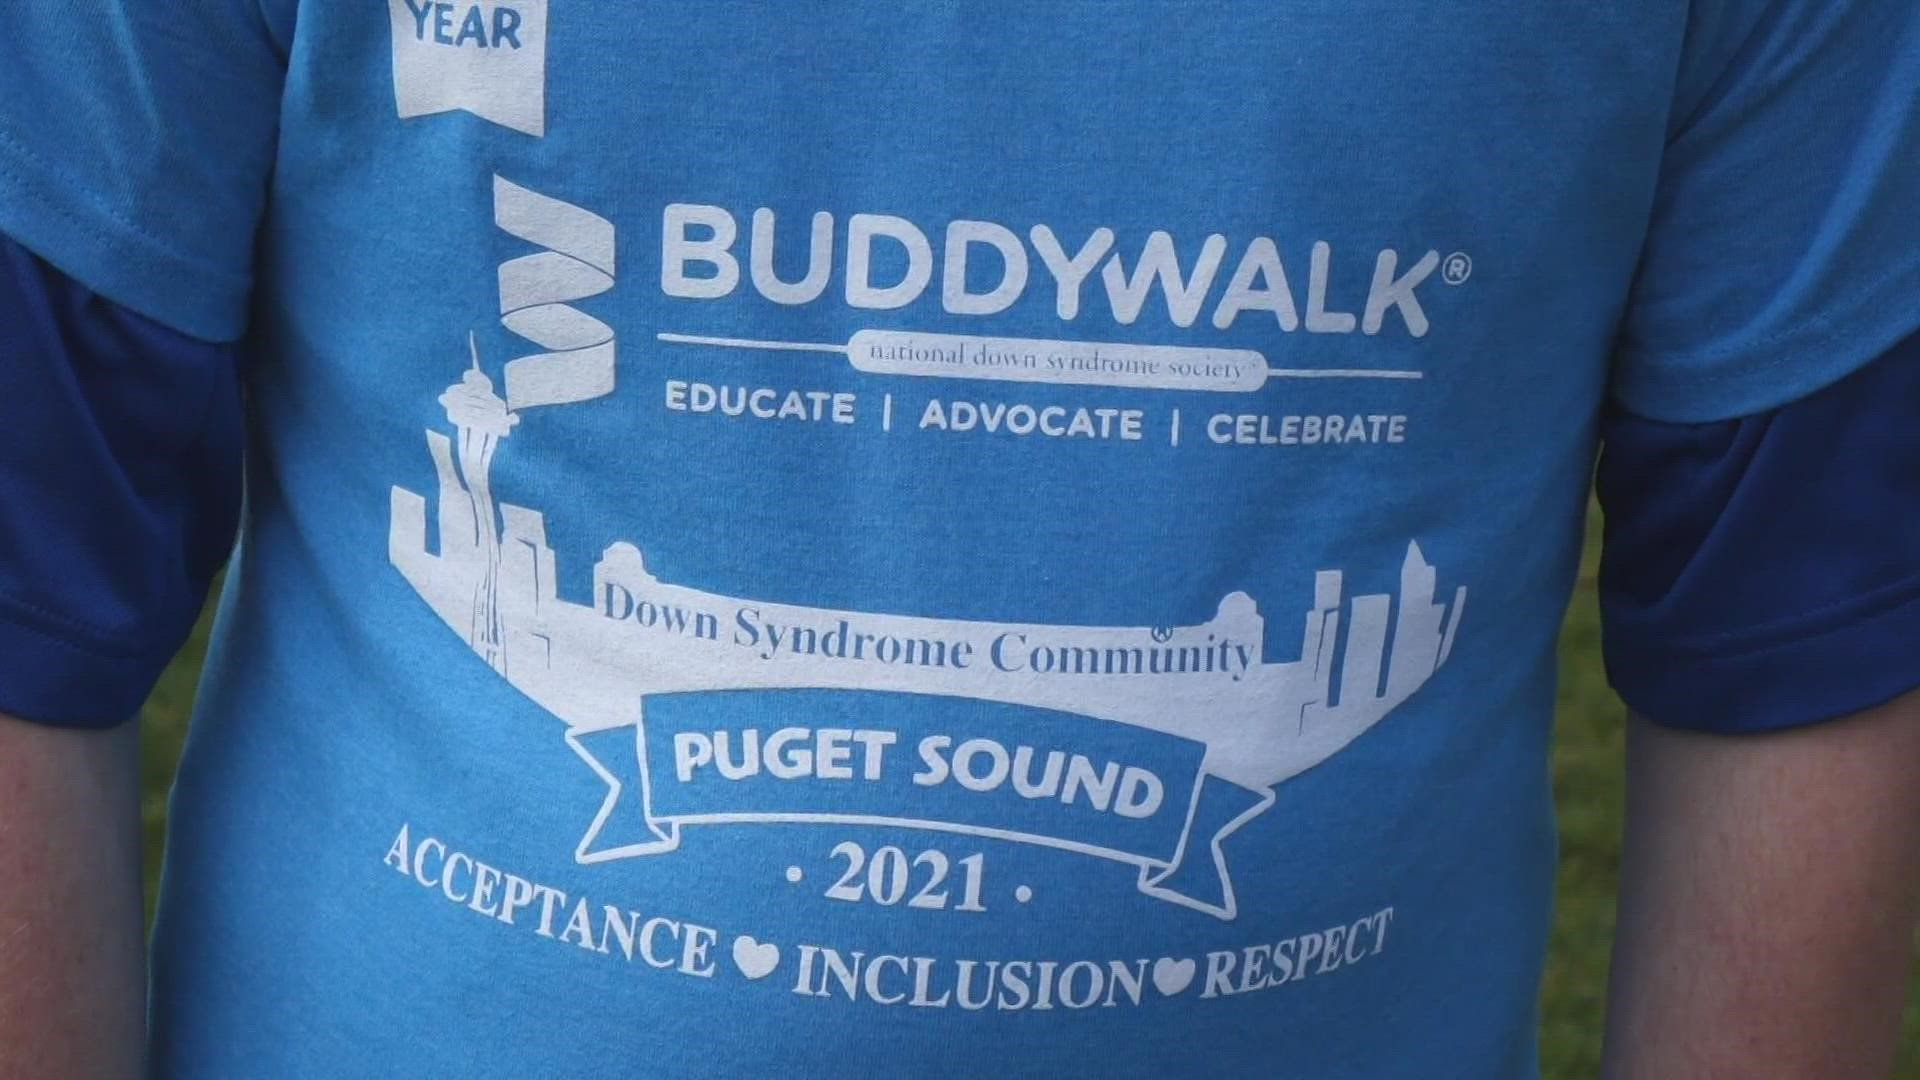 Down Syndrome Community of Puget Sound is hosting the 25th Annual Puget Sound Buddy Walk to promote acceptance, inclusion and respect of people with down syndrome.